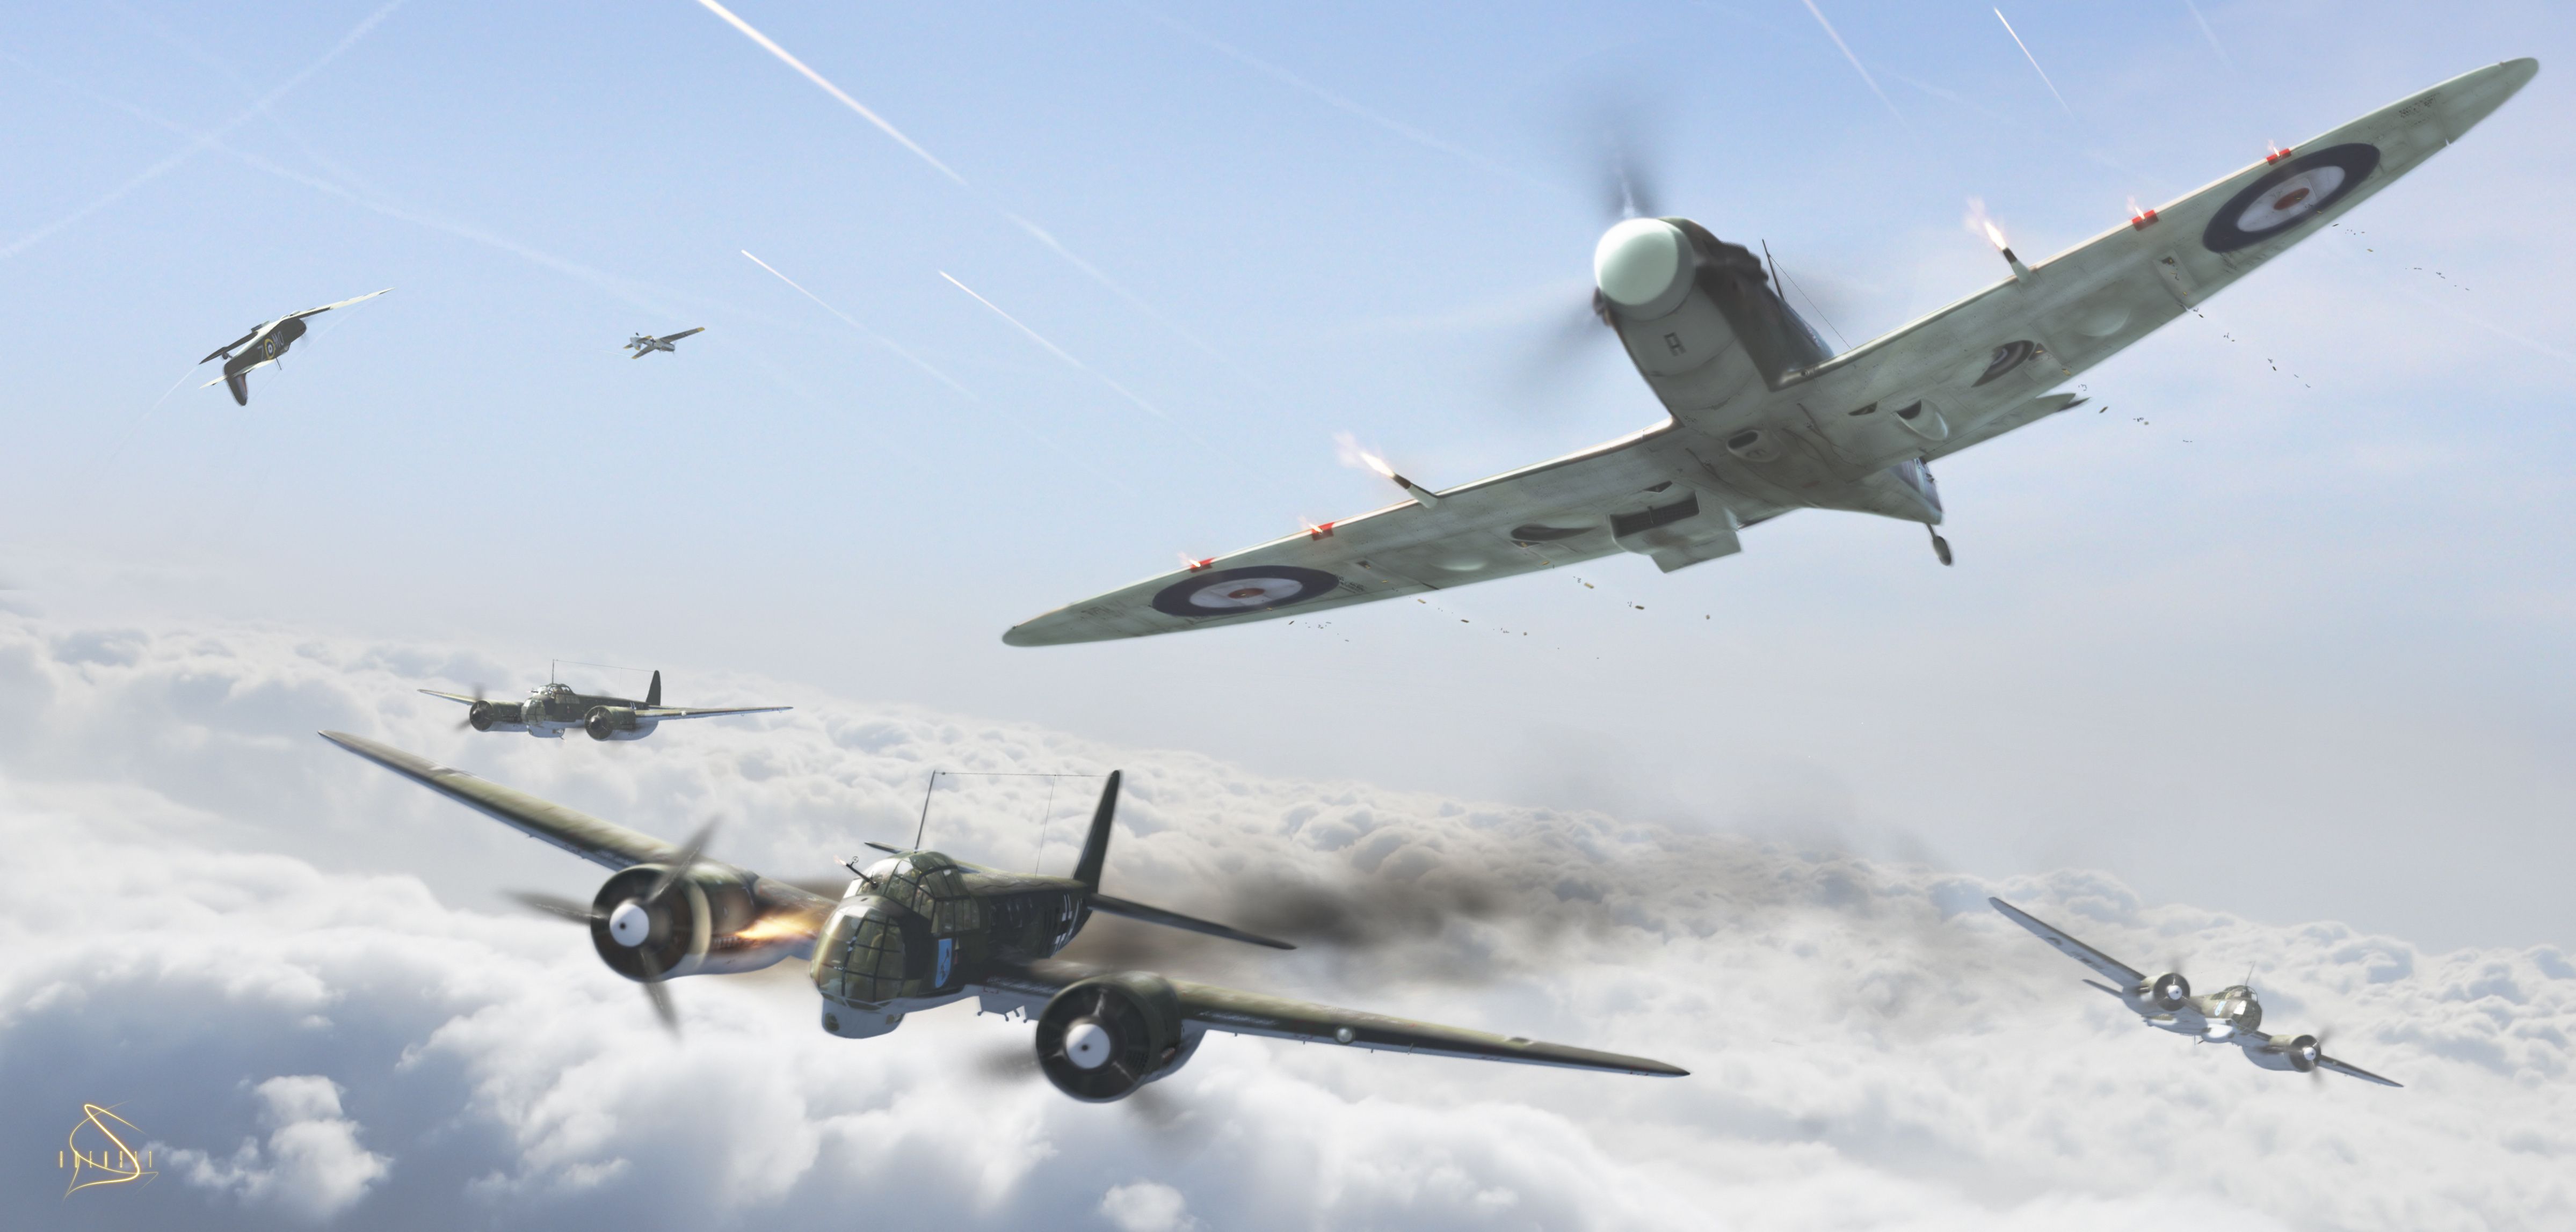 Wallpaper. Aviation. photo. picture. Dogfight, the second